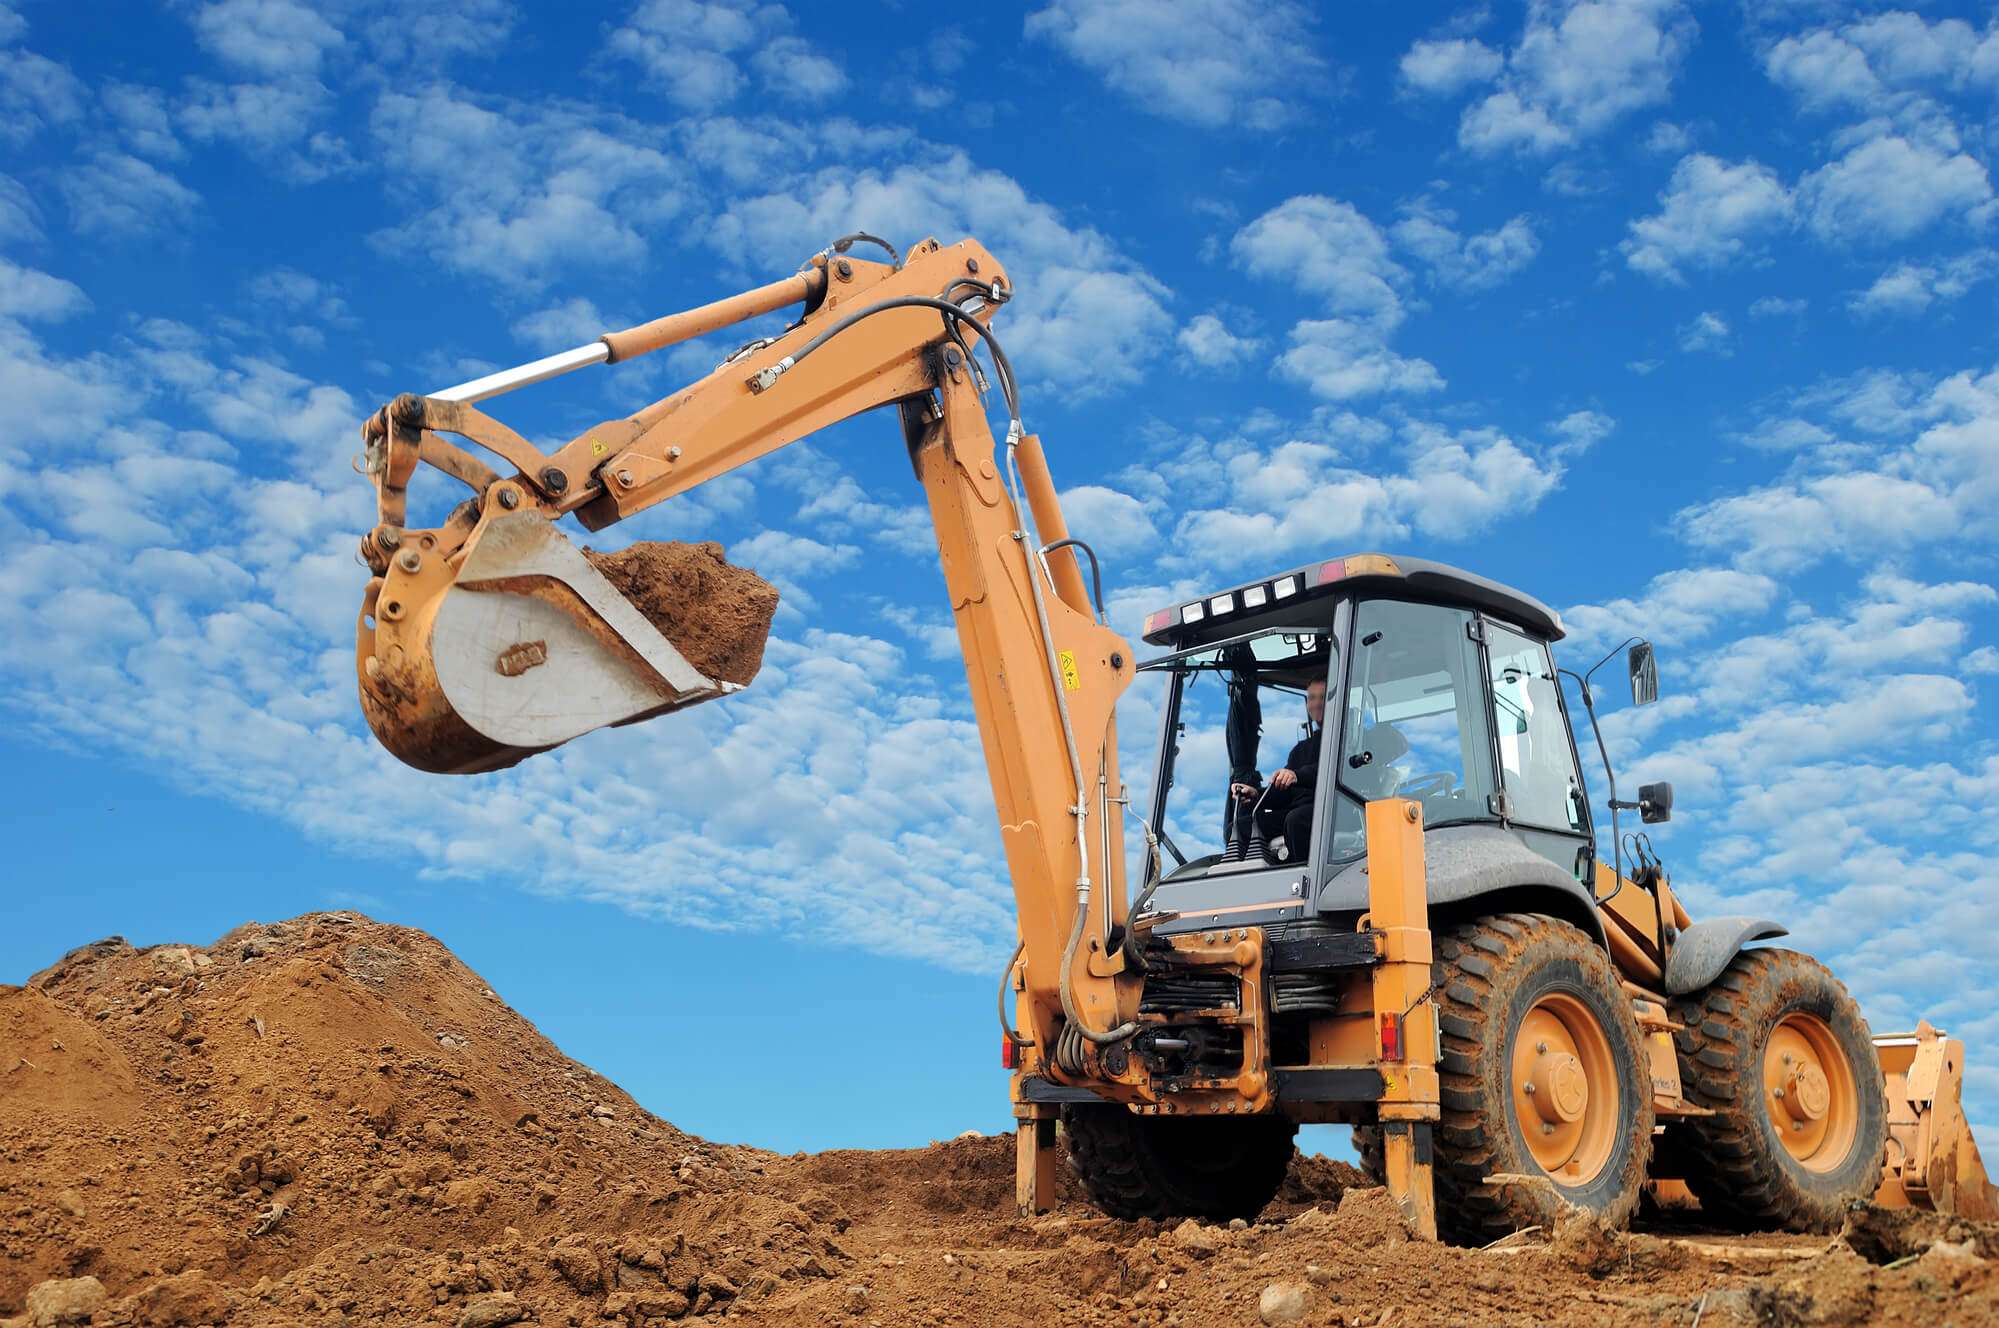 Excavation work: Methods and Safety Considerations